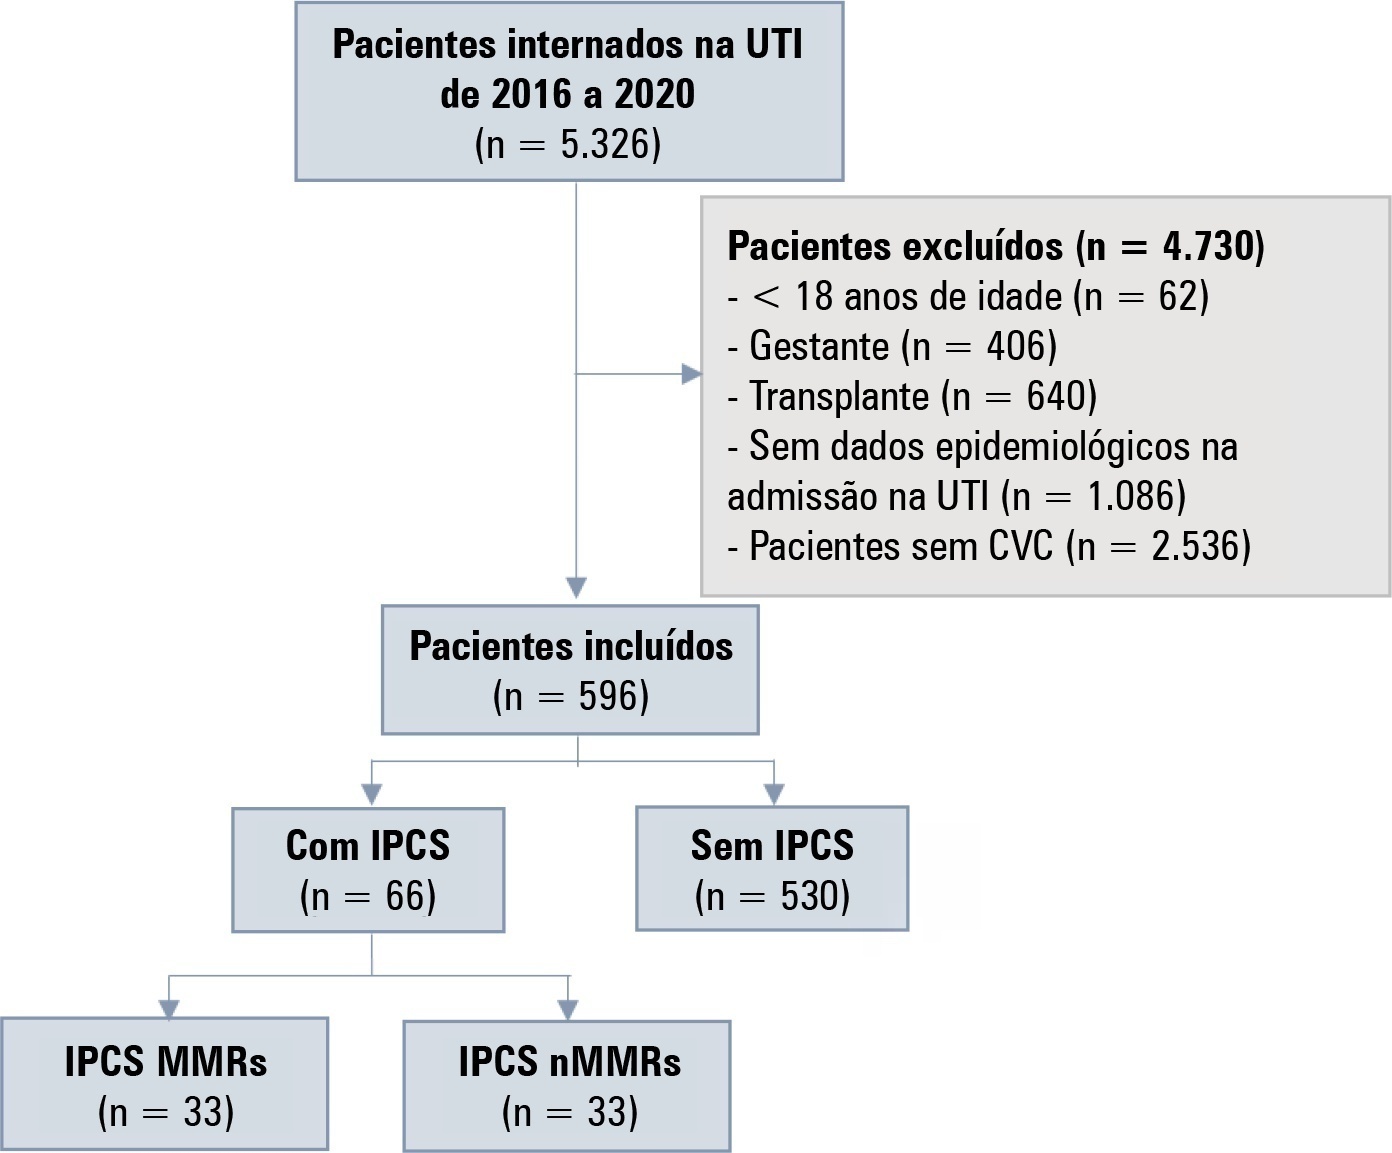 Patient-level costs of central line-associated bloodstream infections caused by multidrug-resistant microorganisms in a public intensive care unit in Brazil: a retrospective cohort study